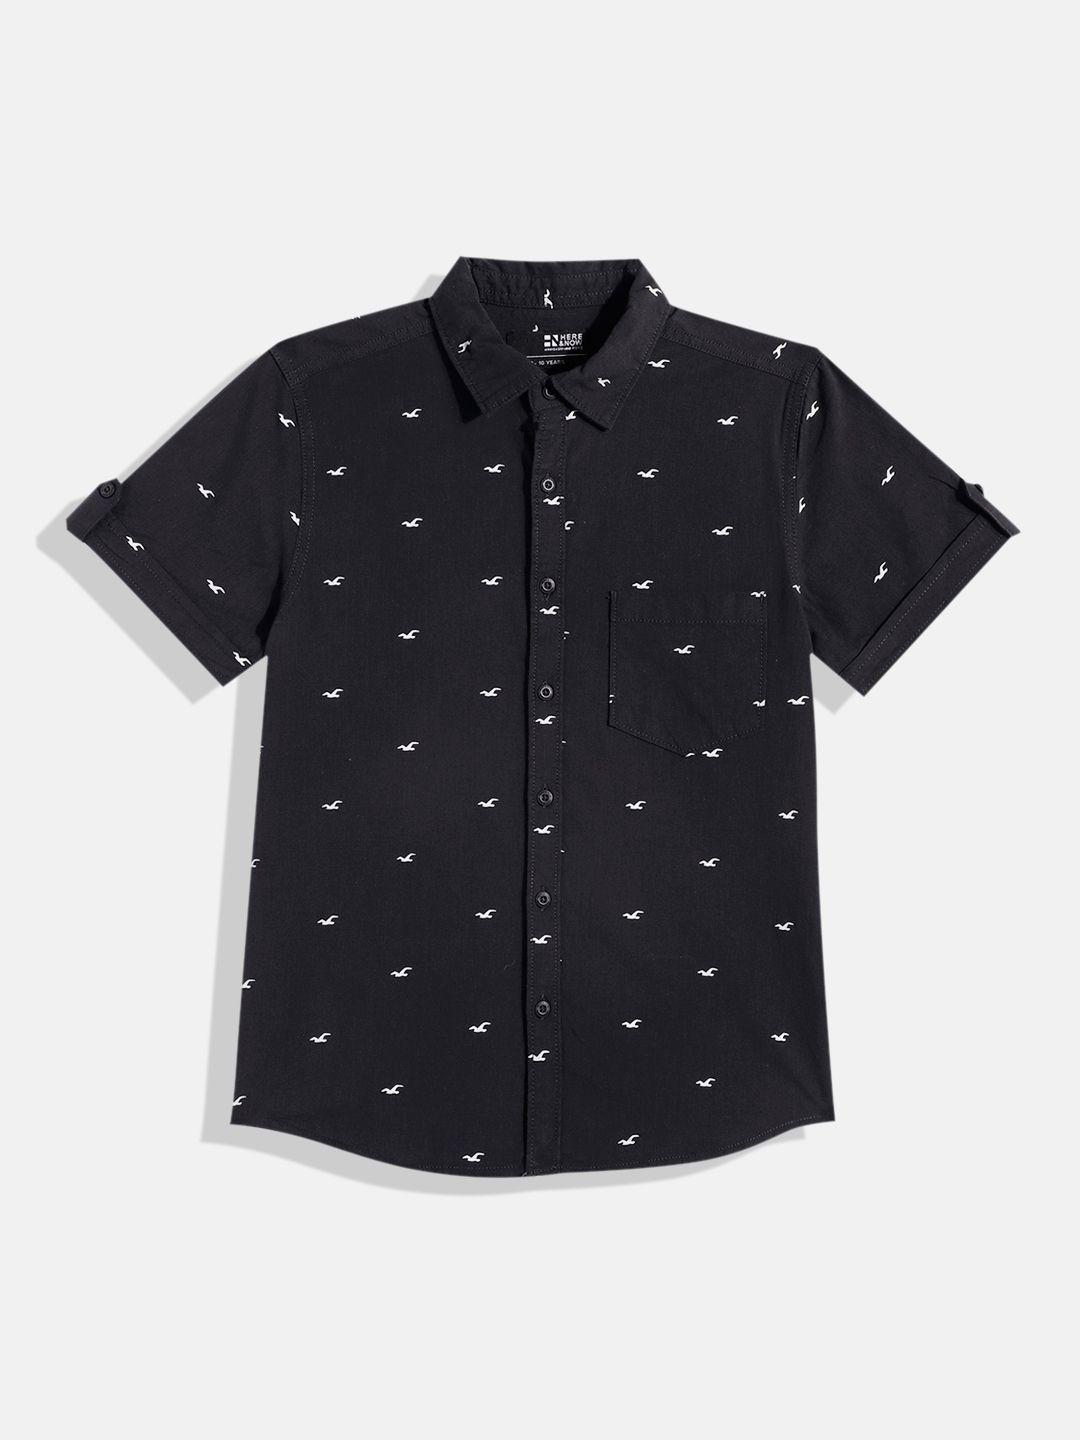 here&now boys black printed casual shirt